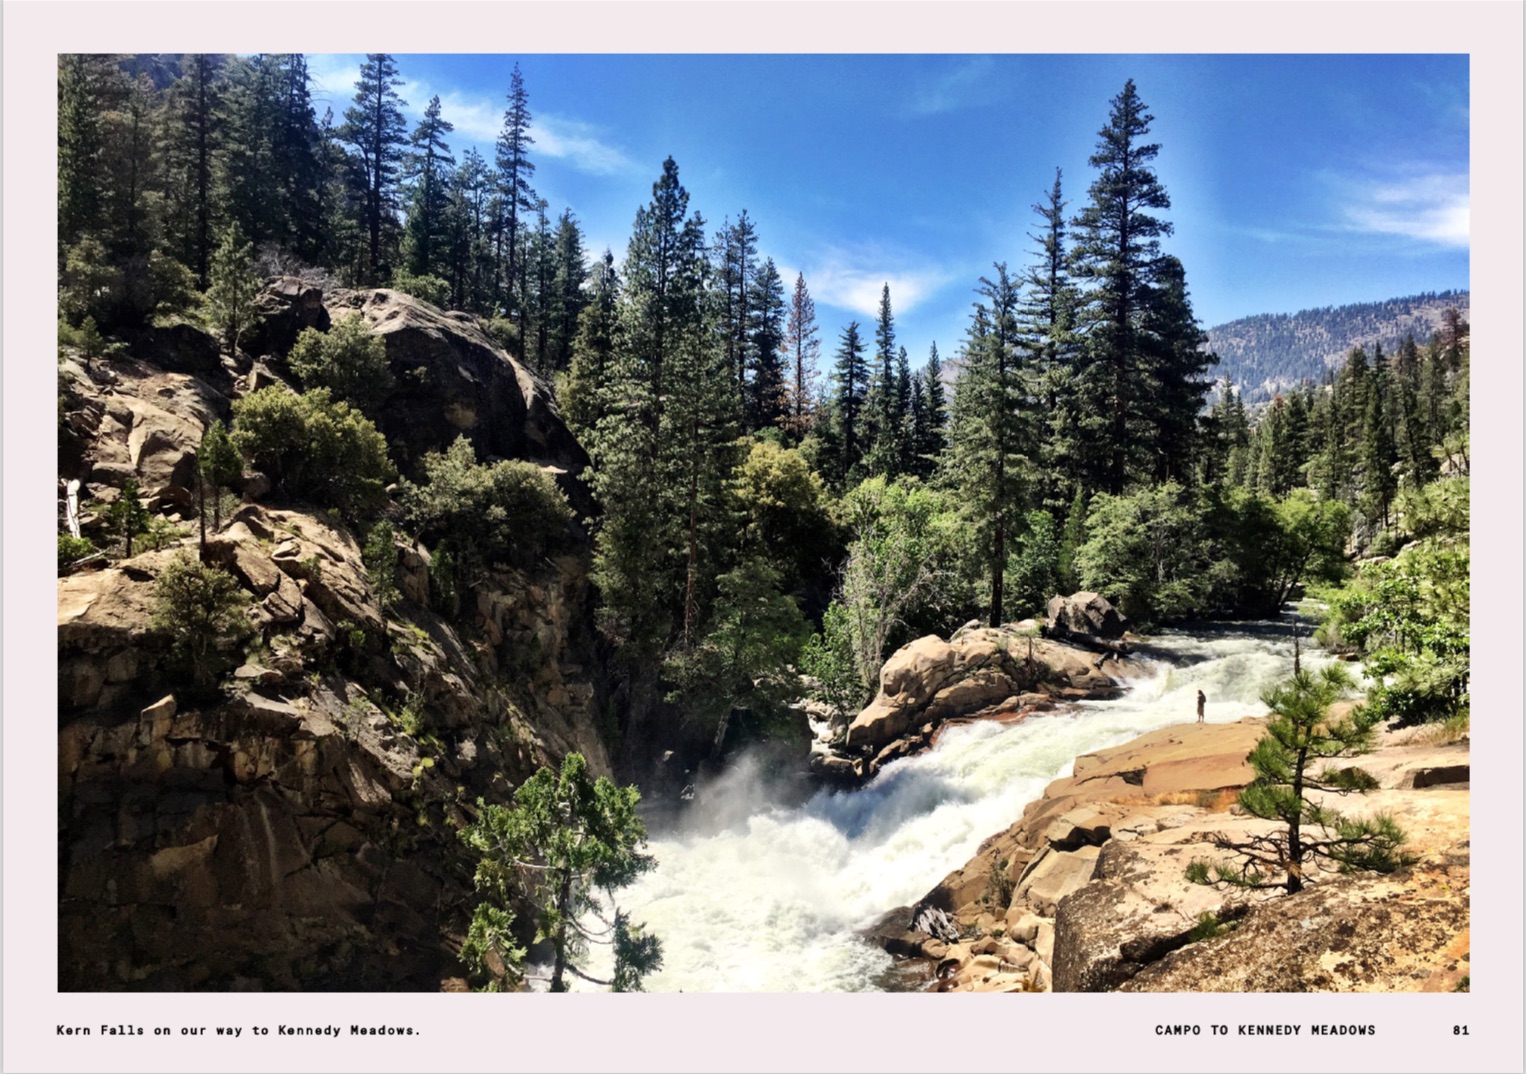 From The Great Alone: Walking the Pacific Crest Trail copyright Gestalten 2019